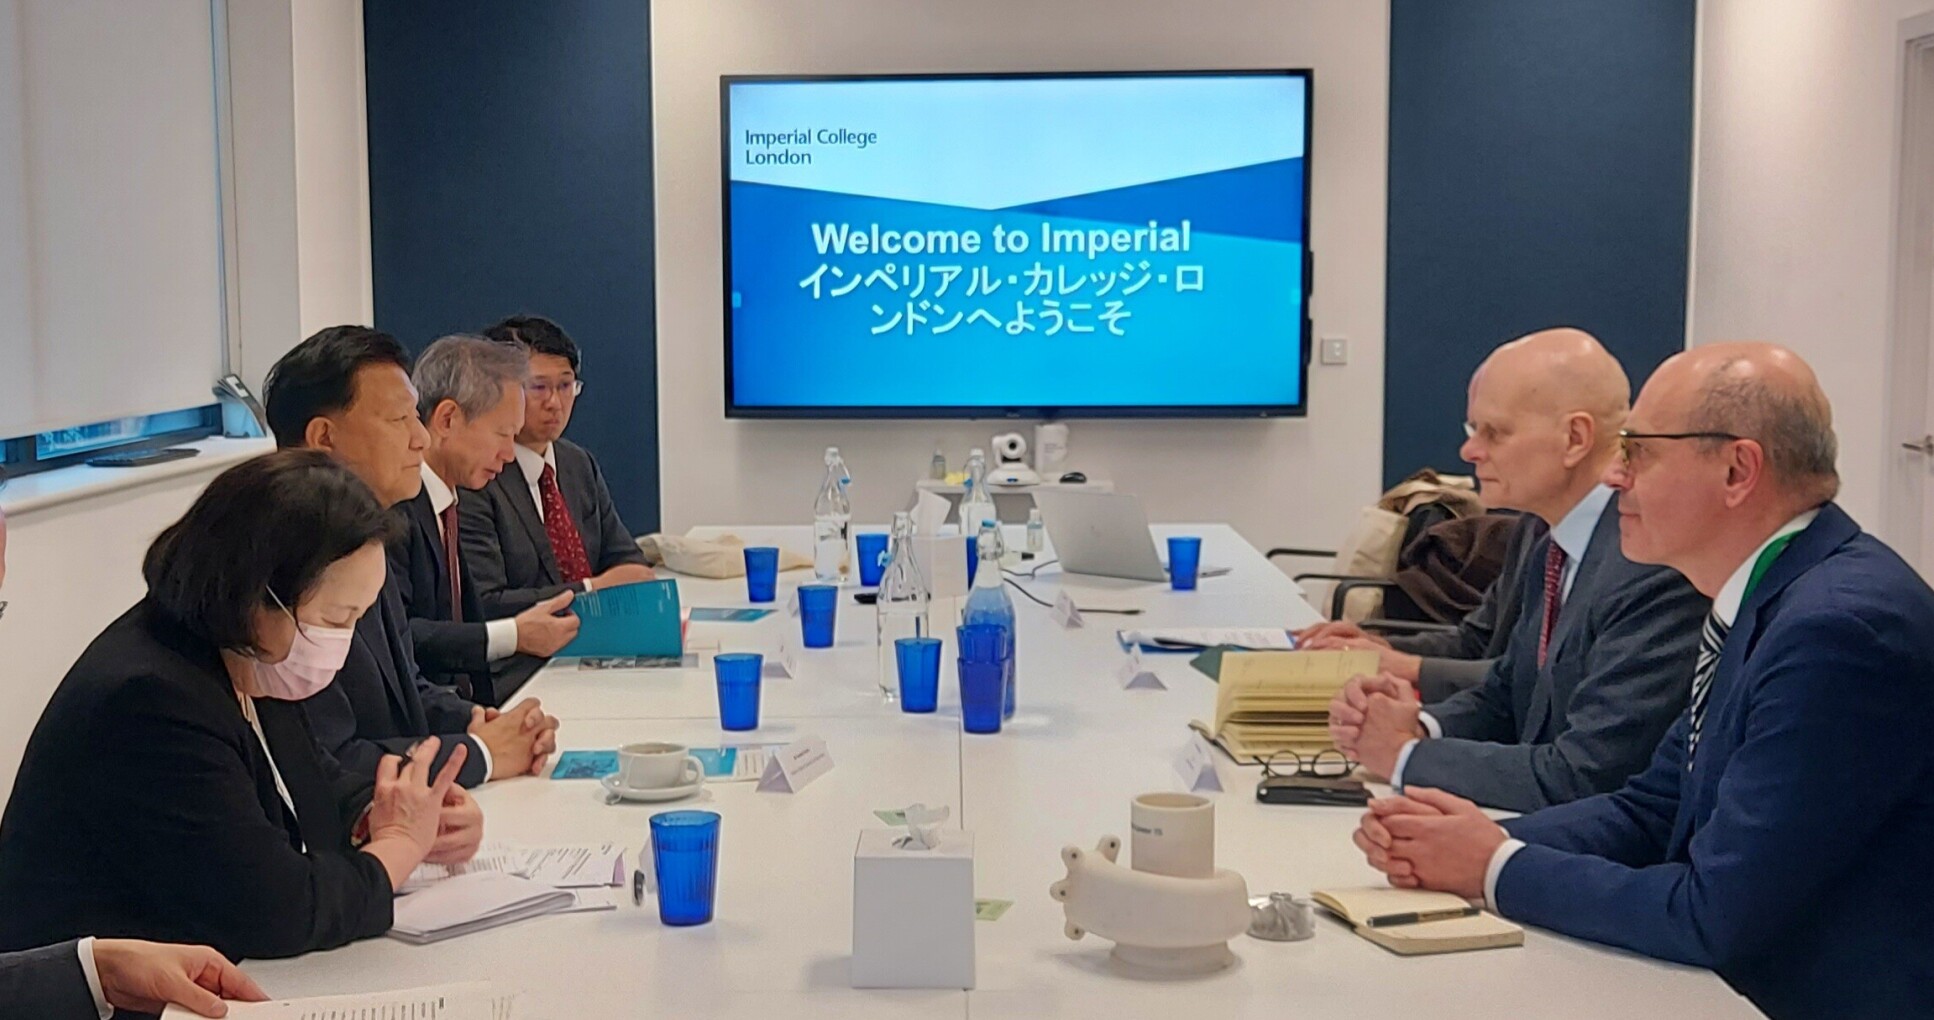 A meeting between Japan’s Minister for Economic and Fiscal Policy Yoshitaka Shindo and Imperial’s Provost Professor Ian Walmsley.